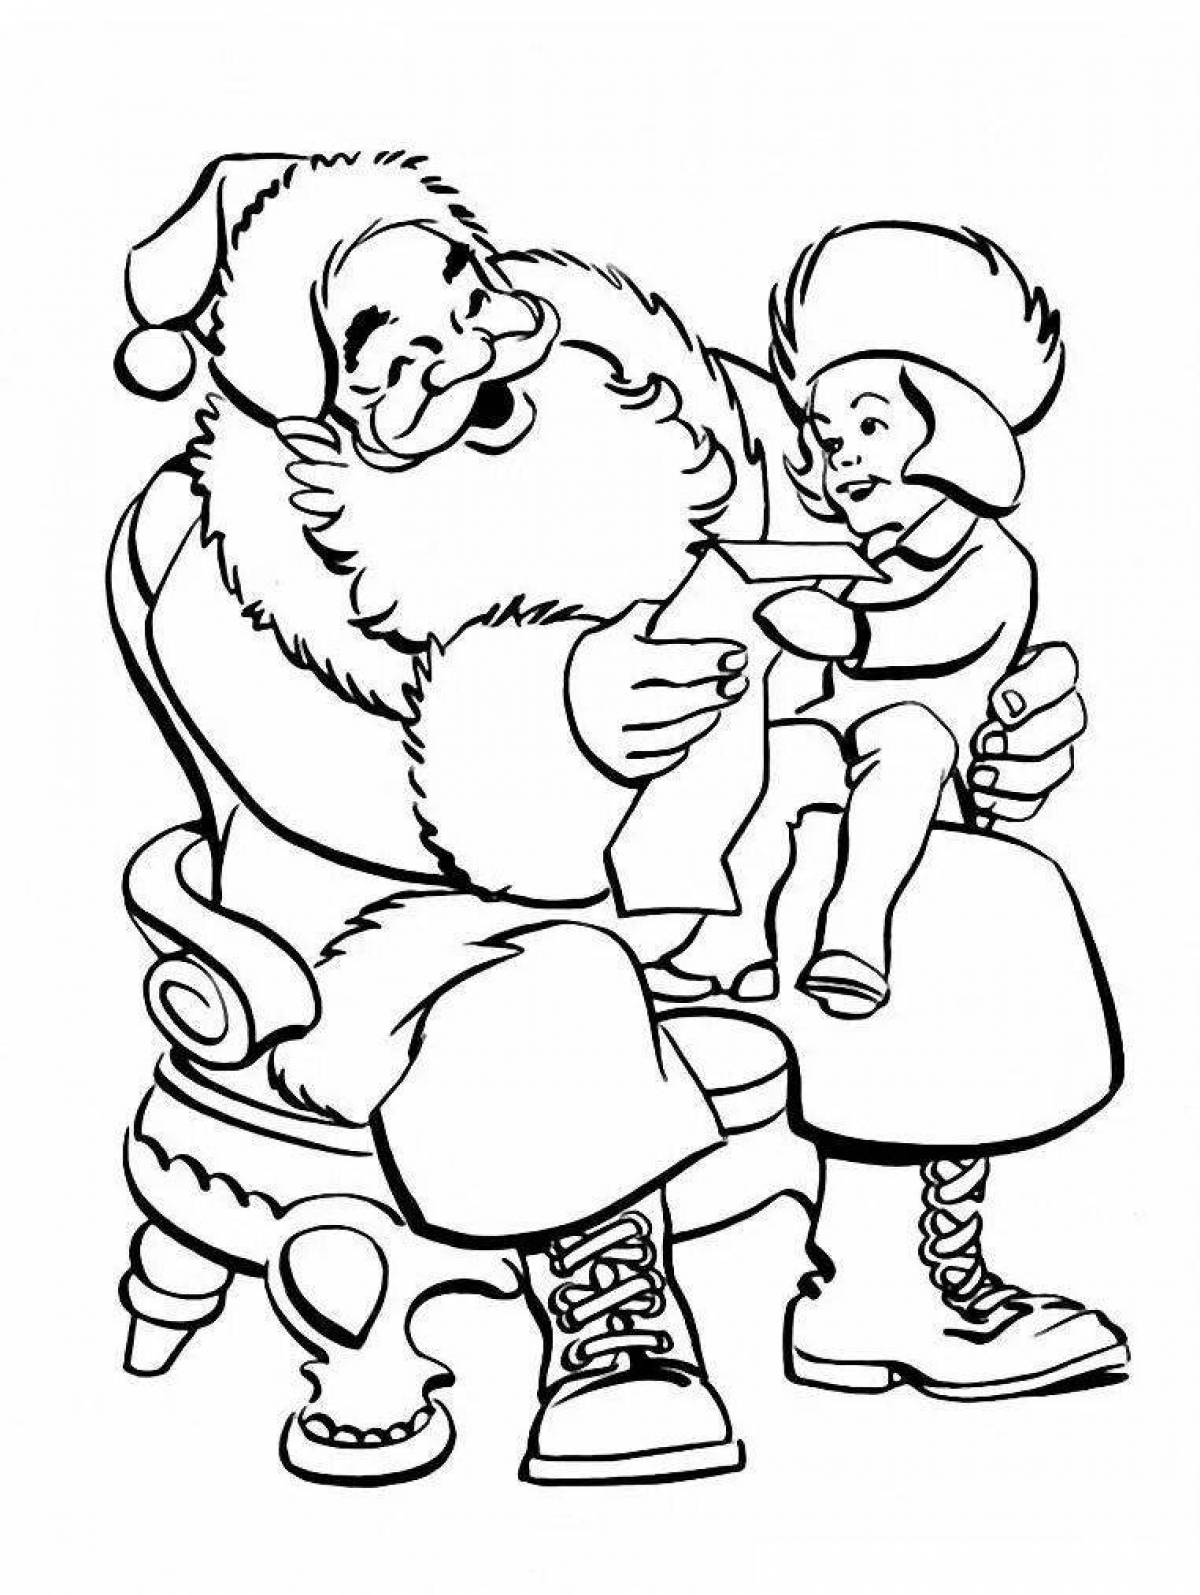 Delightful coloring of Santa Claus and Snow Maiden